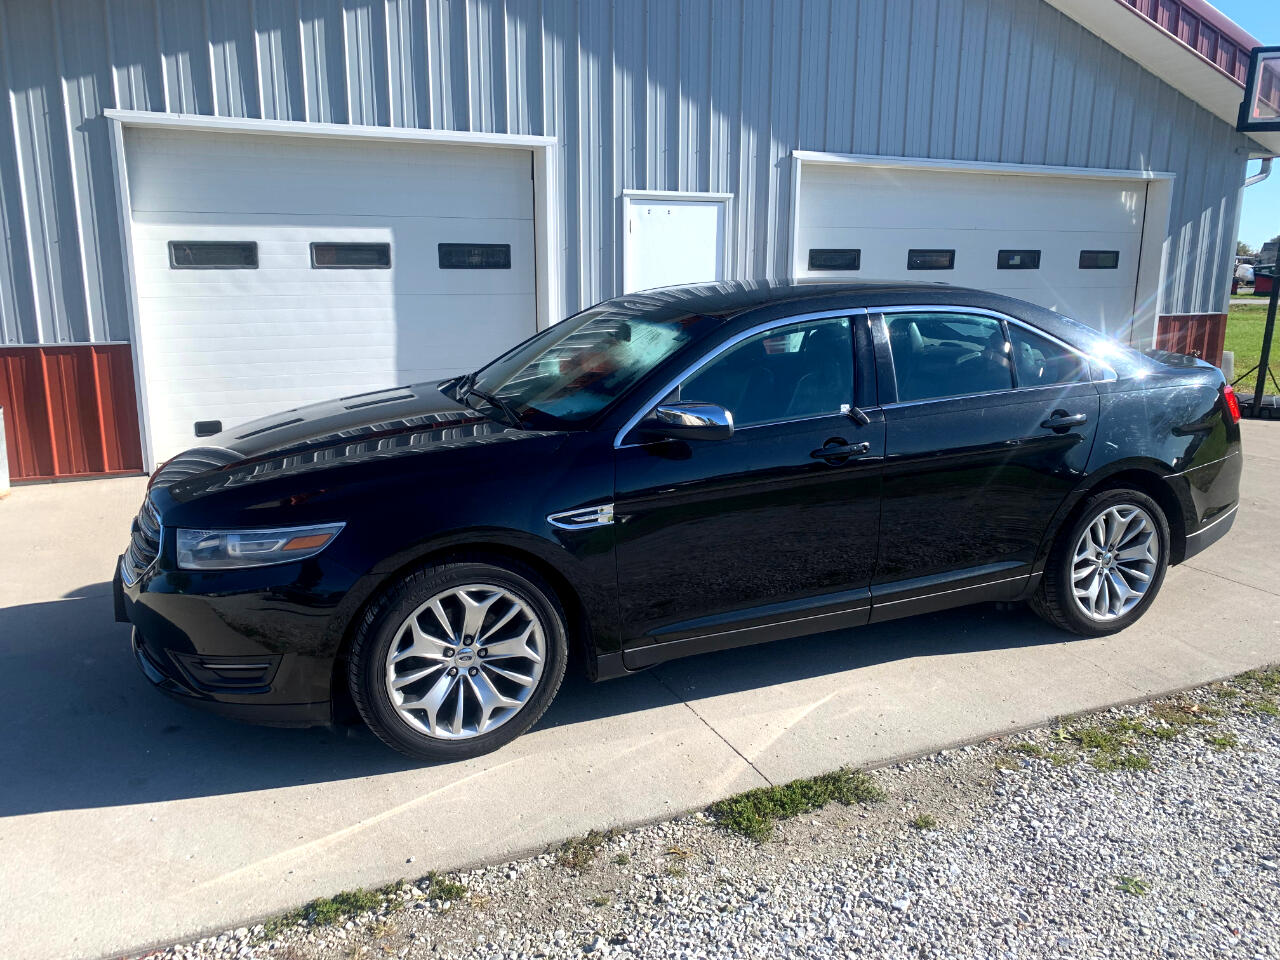 2014 Ford Taurus Limited FWD